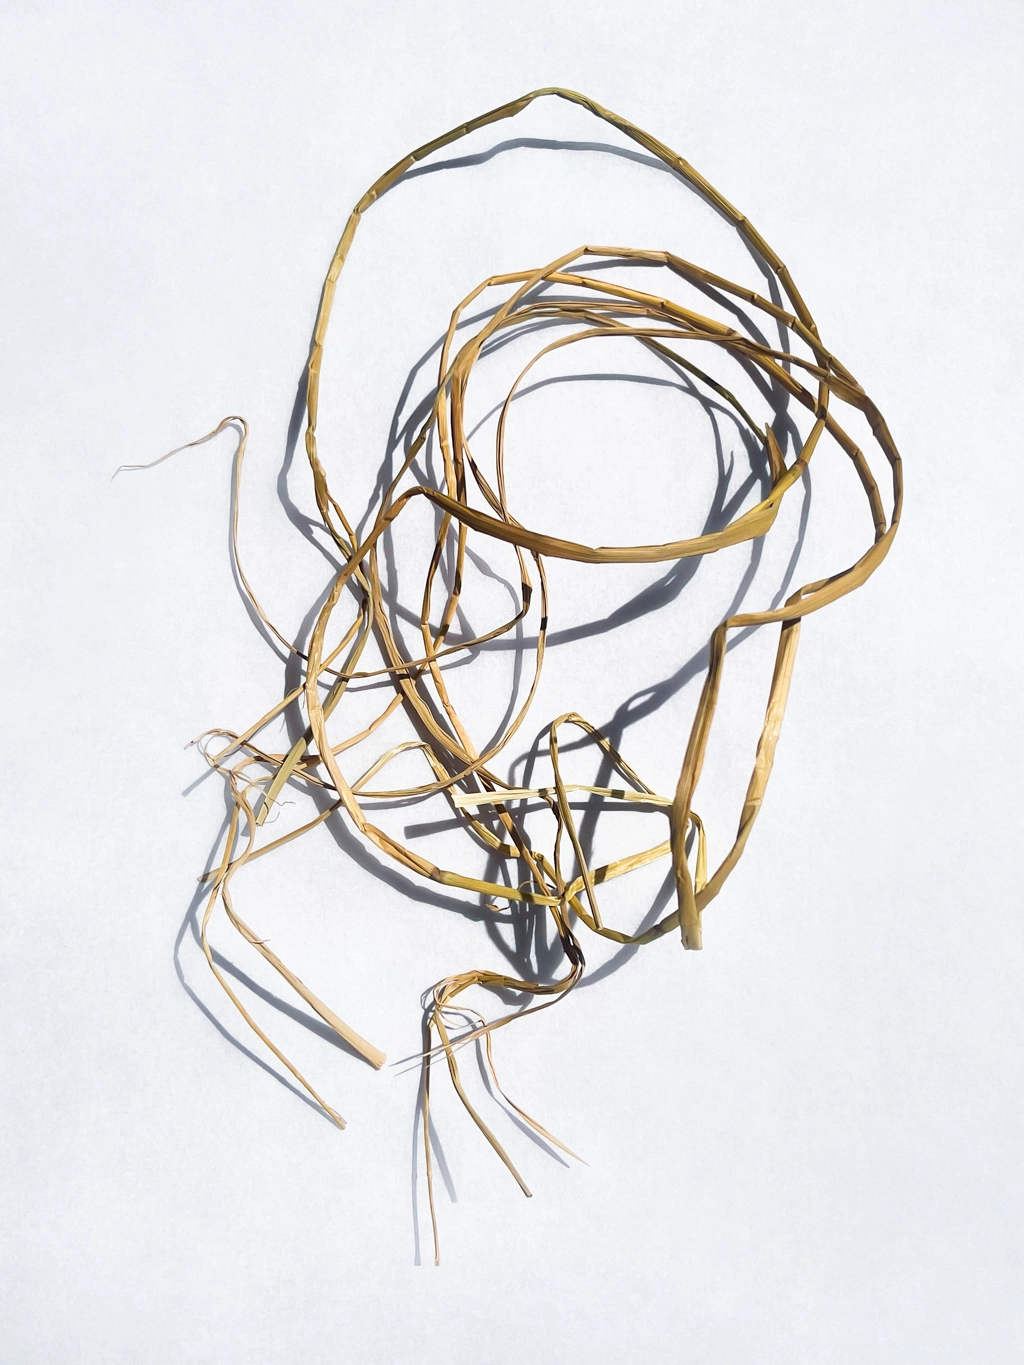 Artwork created by untying the straw used when making natto and placing it at random on a white background. The photo was taken using bright light, which has resulted in clear shadows.